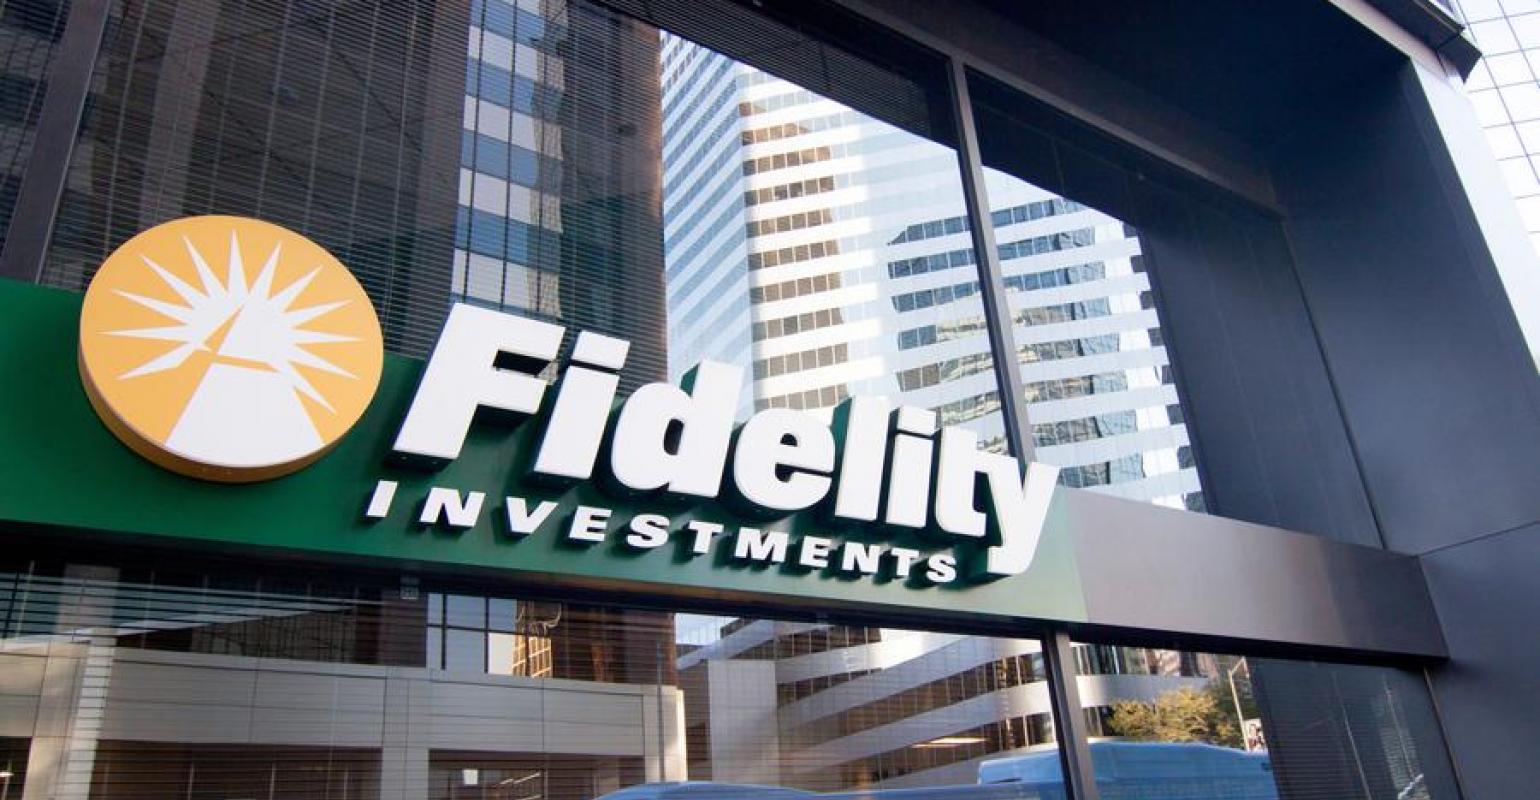 Fidelity Investments updated their - Fidelity Investments